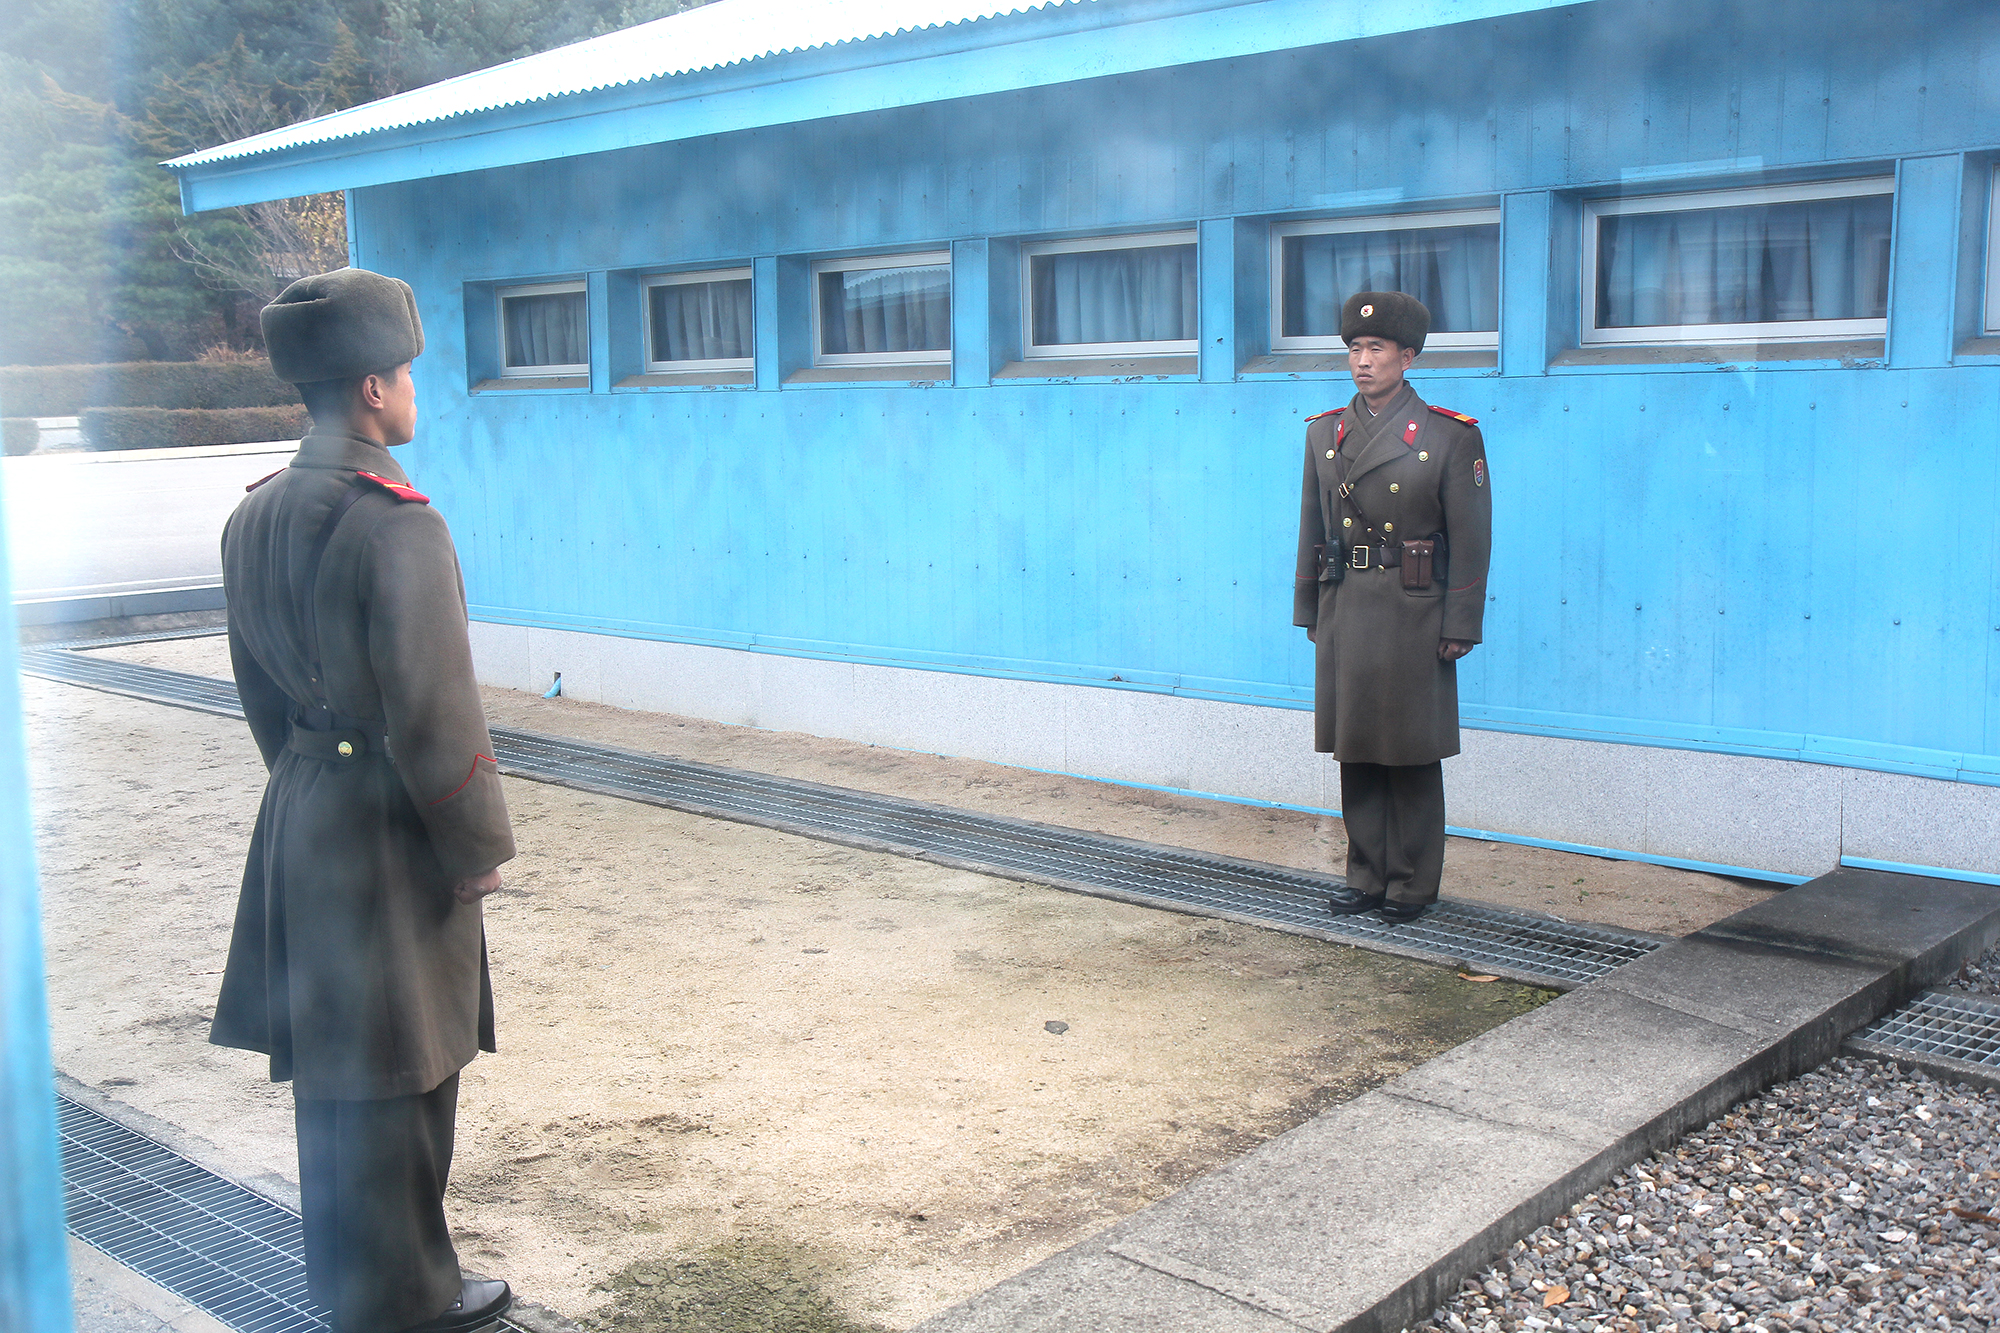 The DMZ is a remnant of the Korean war